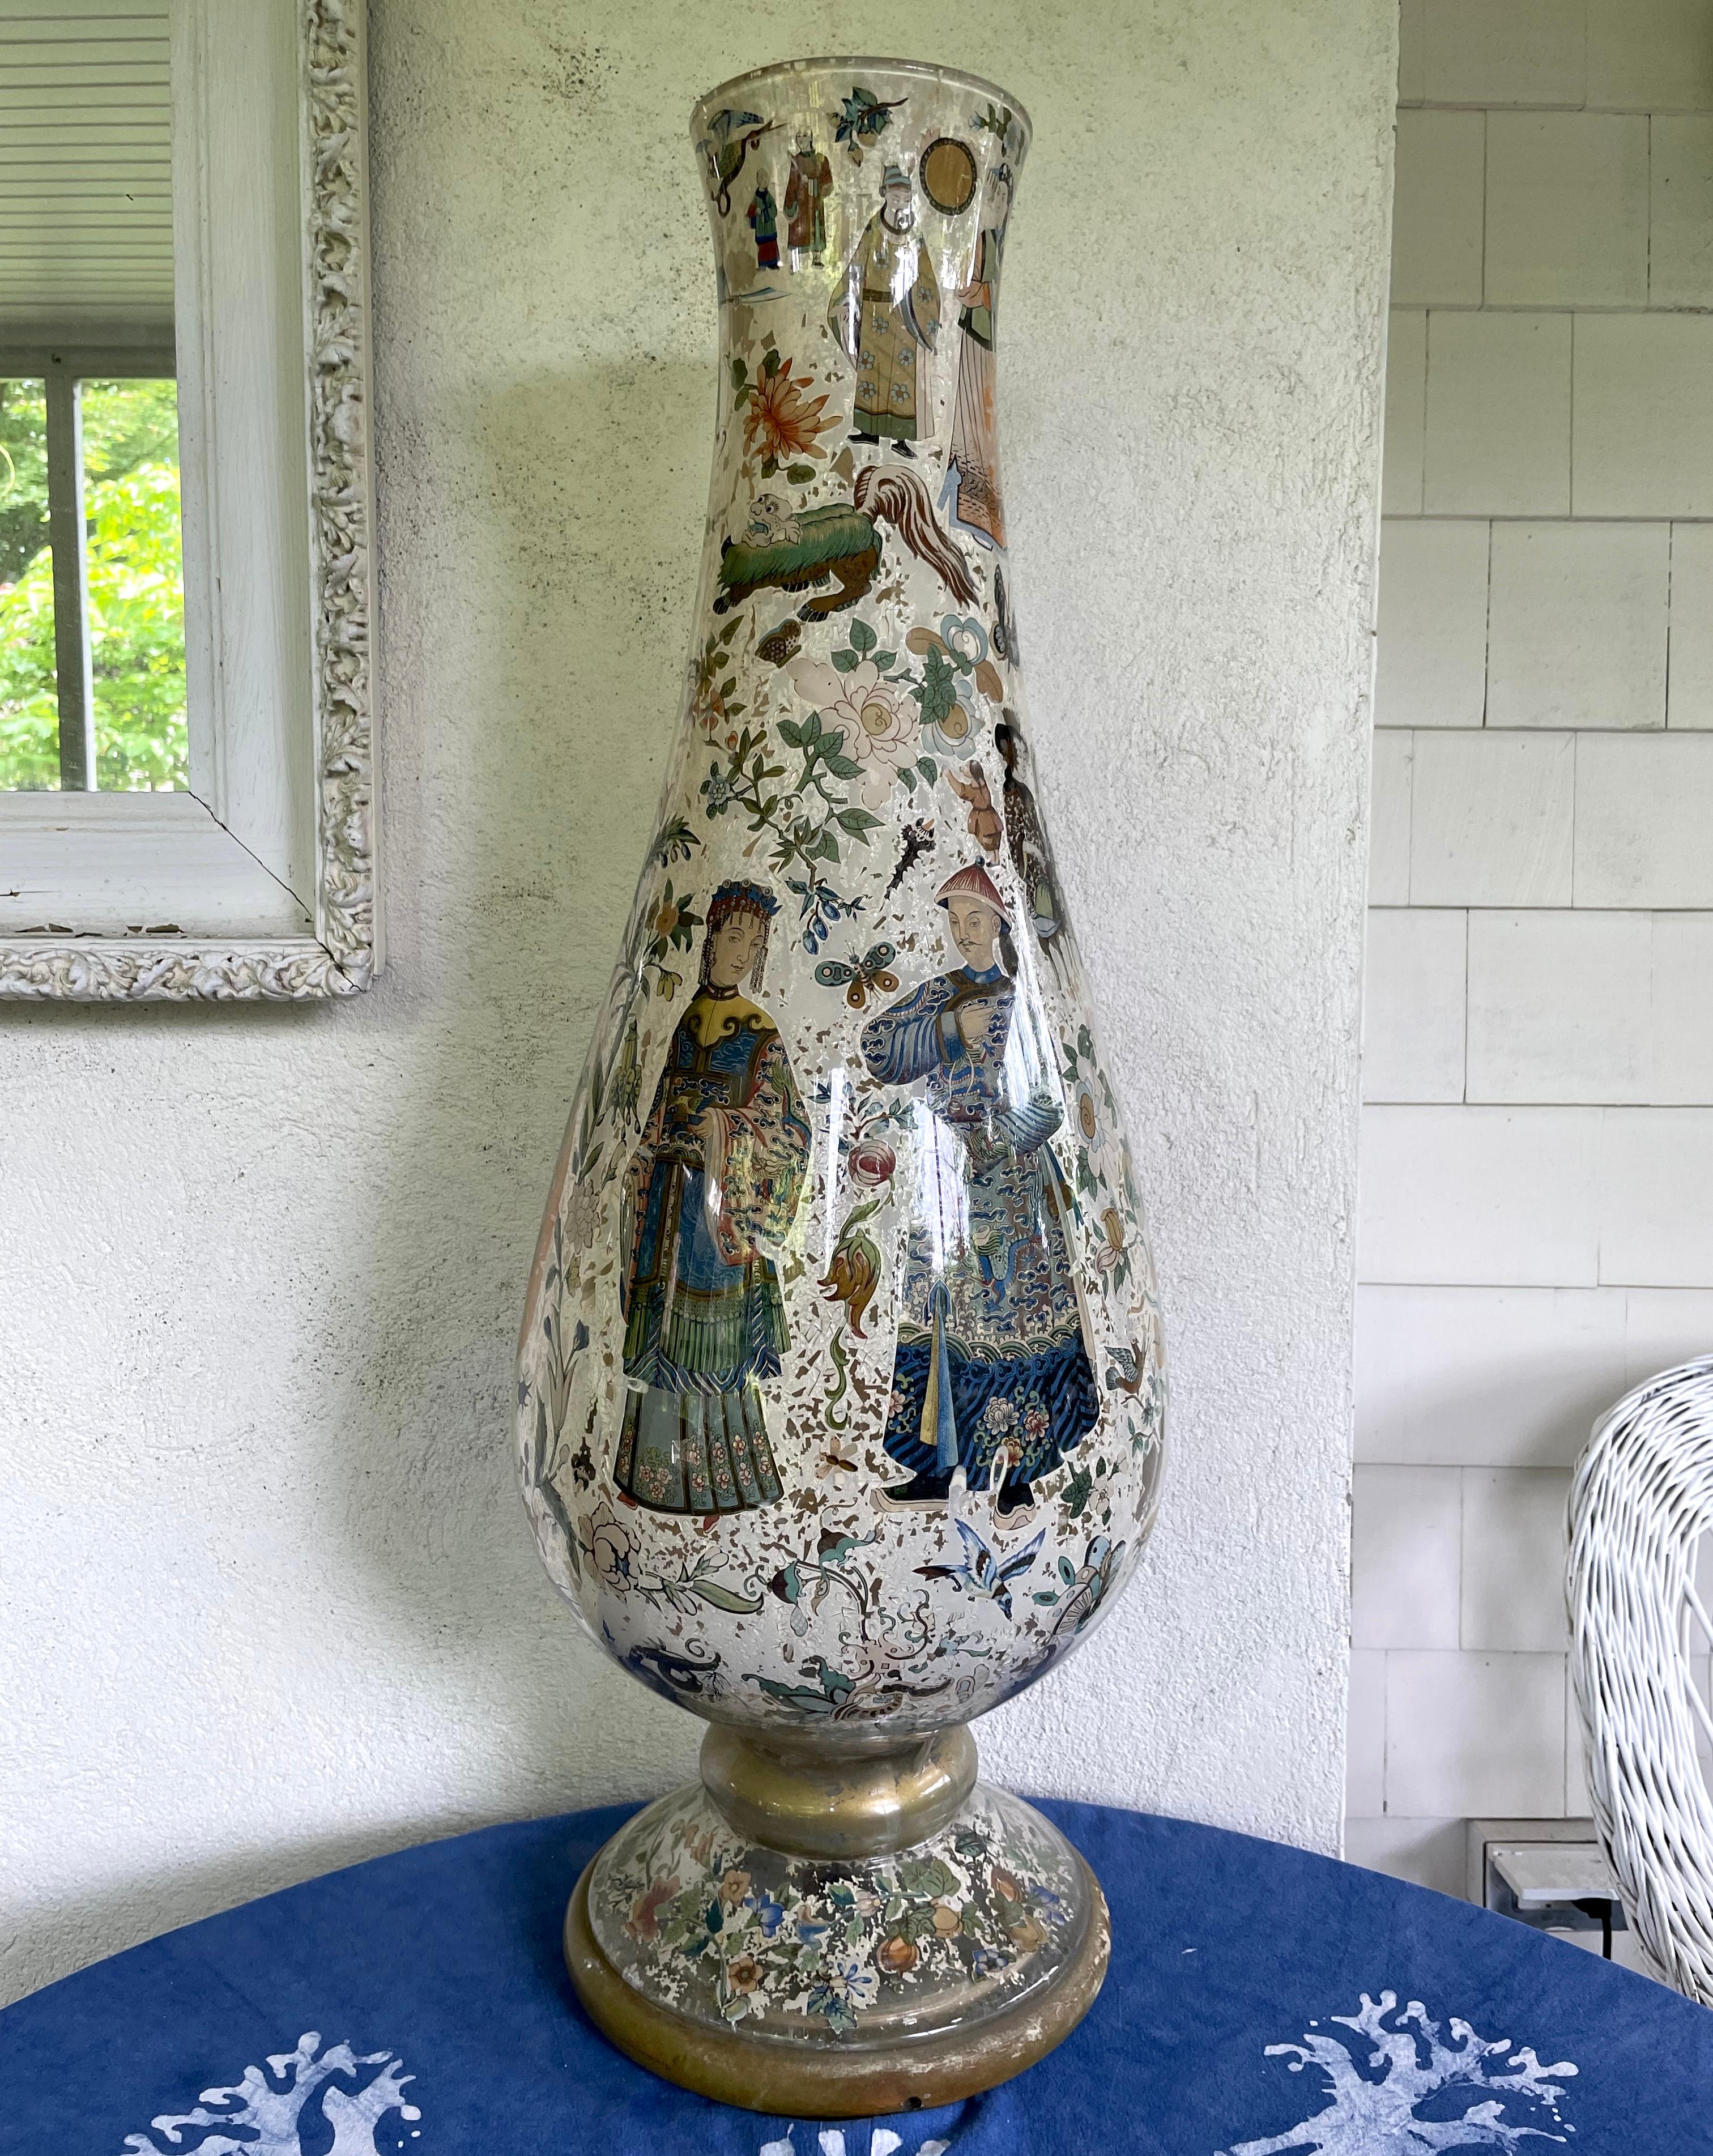 Continental chinoiserie baluster vase. Very large baluster form chinoiserie vase covered in continental decals made during rage for decalcomania. Europe, 19th century 
Dimensions: 8.5” diameter base; 11” diameter at widest; 5.5” diameter top; 30”